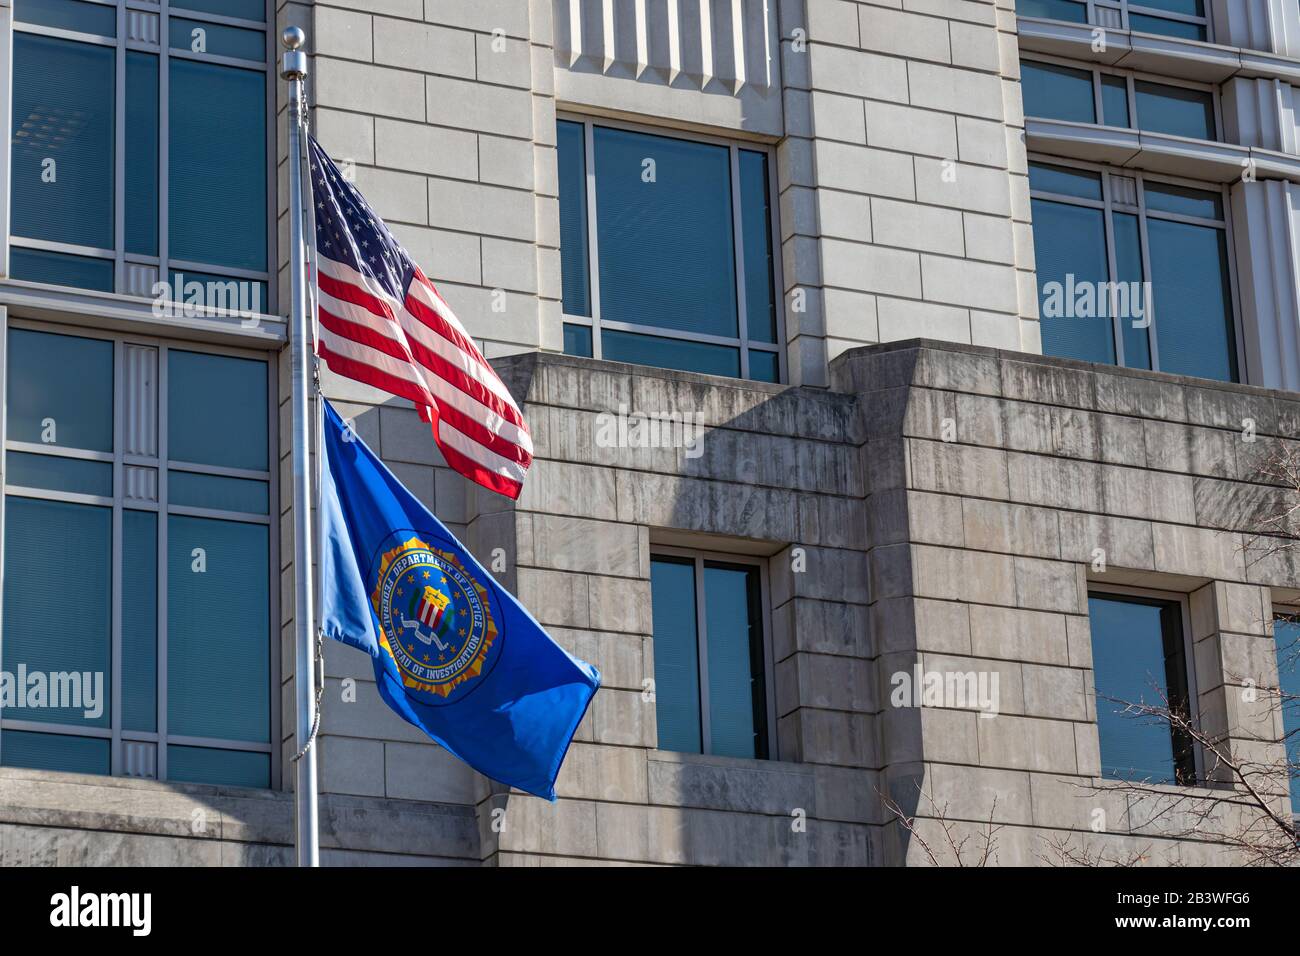 December 12, 2019: Seal of the FBI on a flag and American flag waving at their field office in D.C. Stock Photo